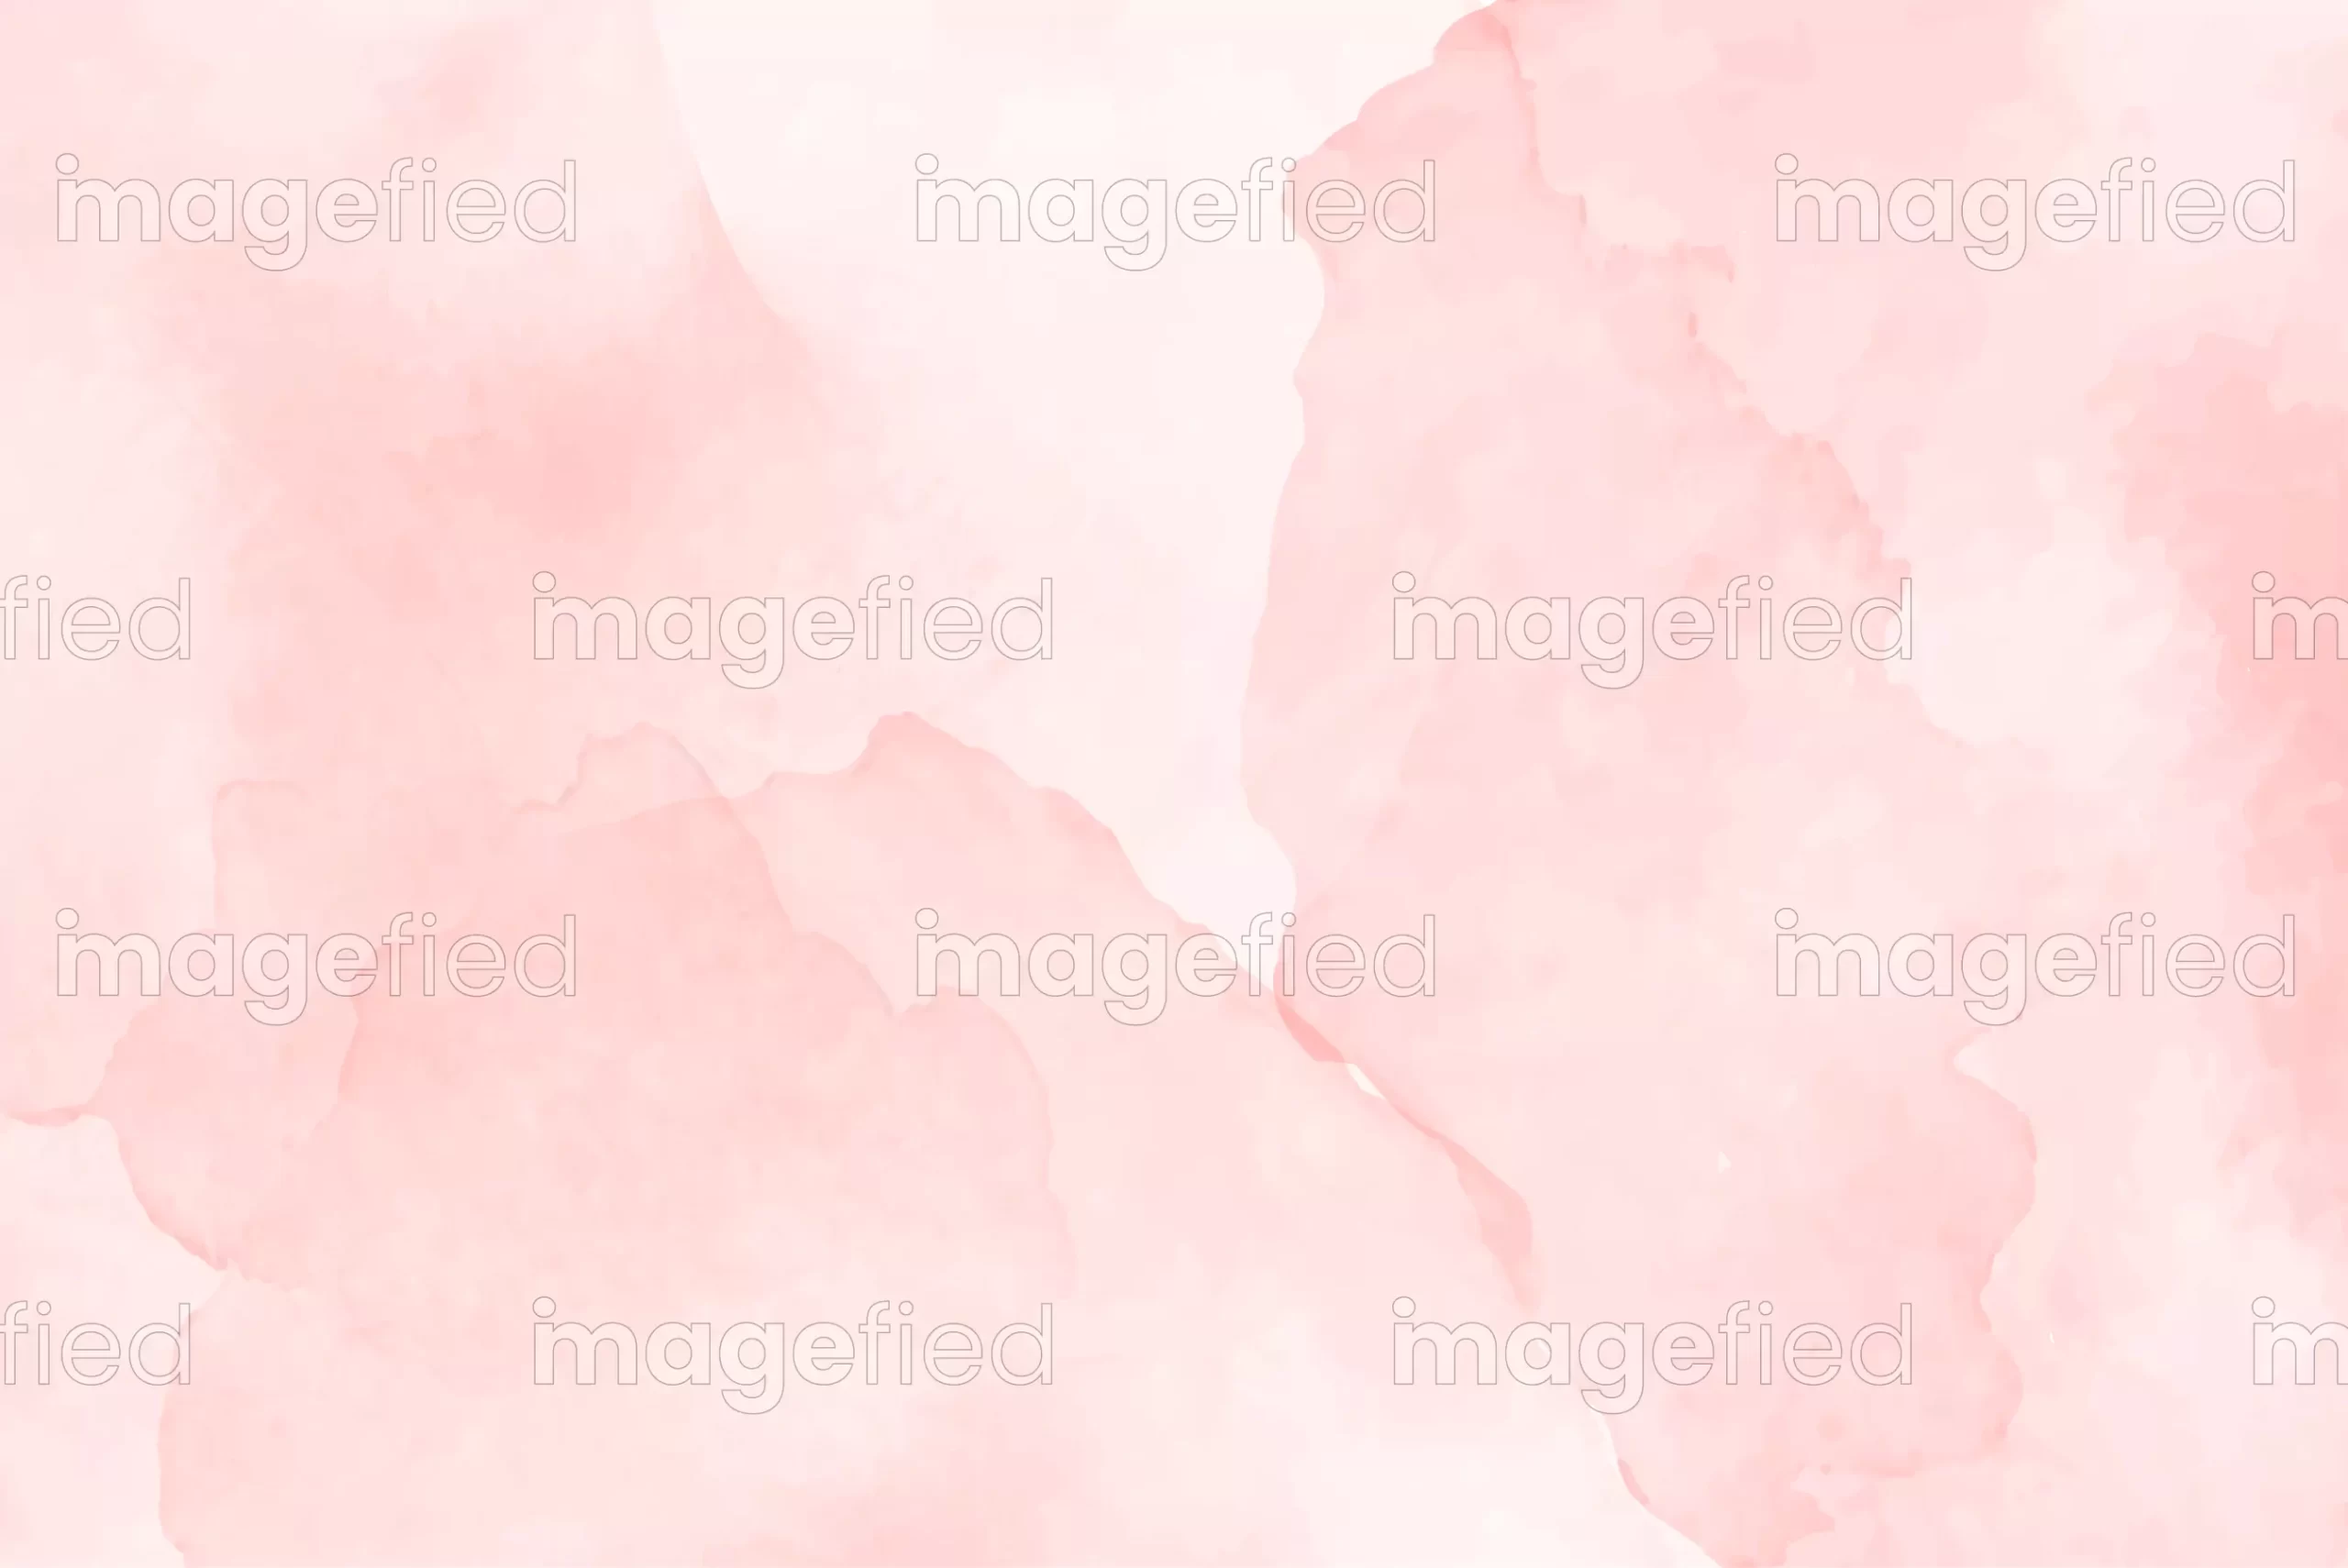 Hand drawn light pink watercolor background - Imagefied